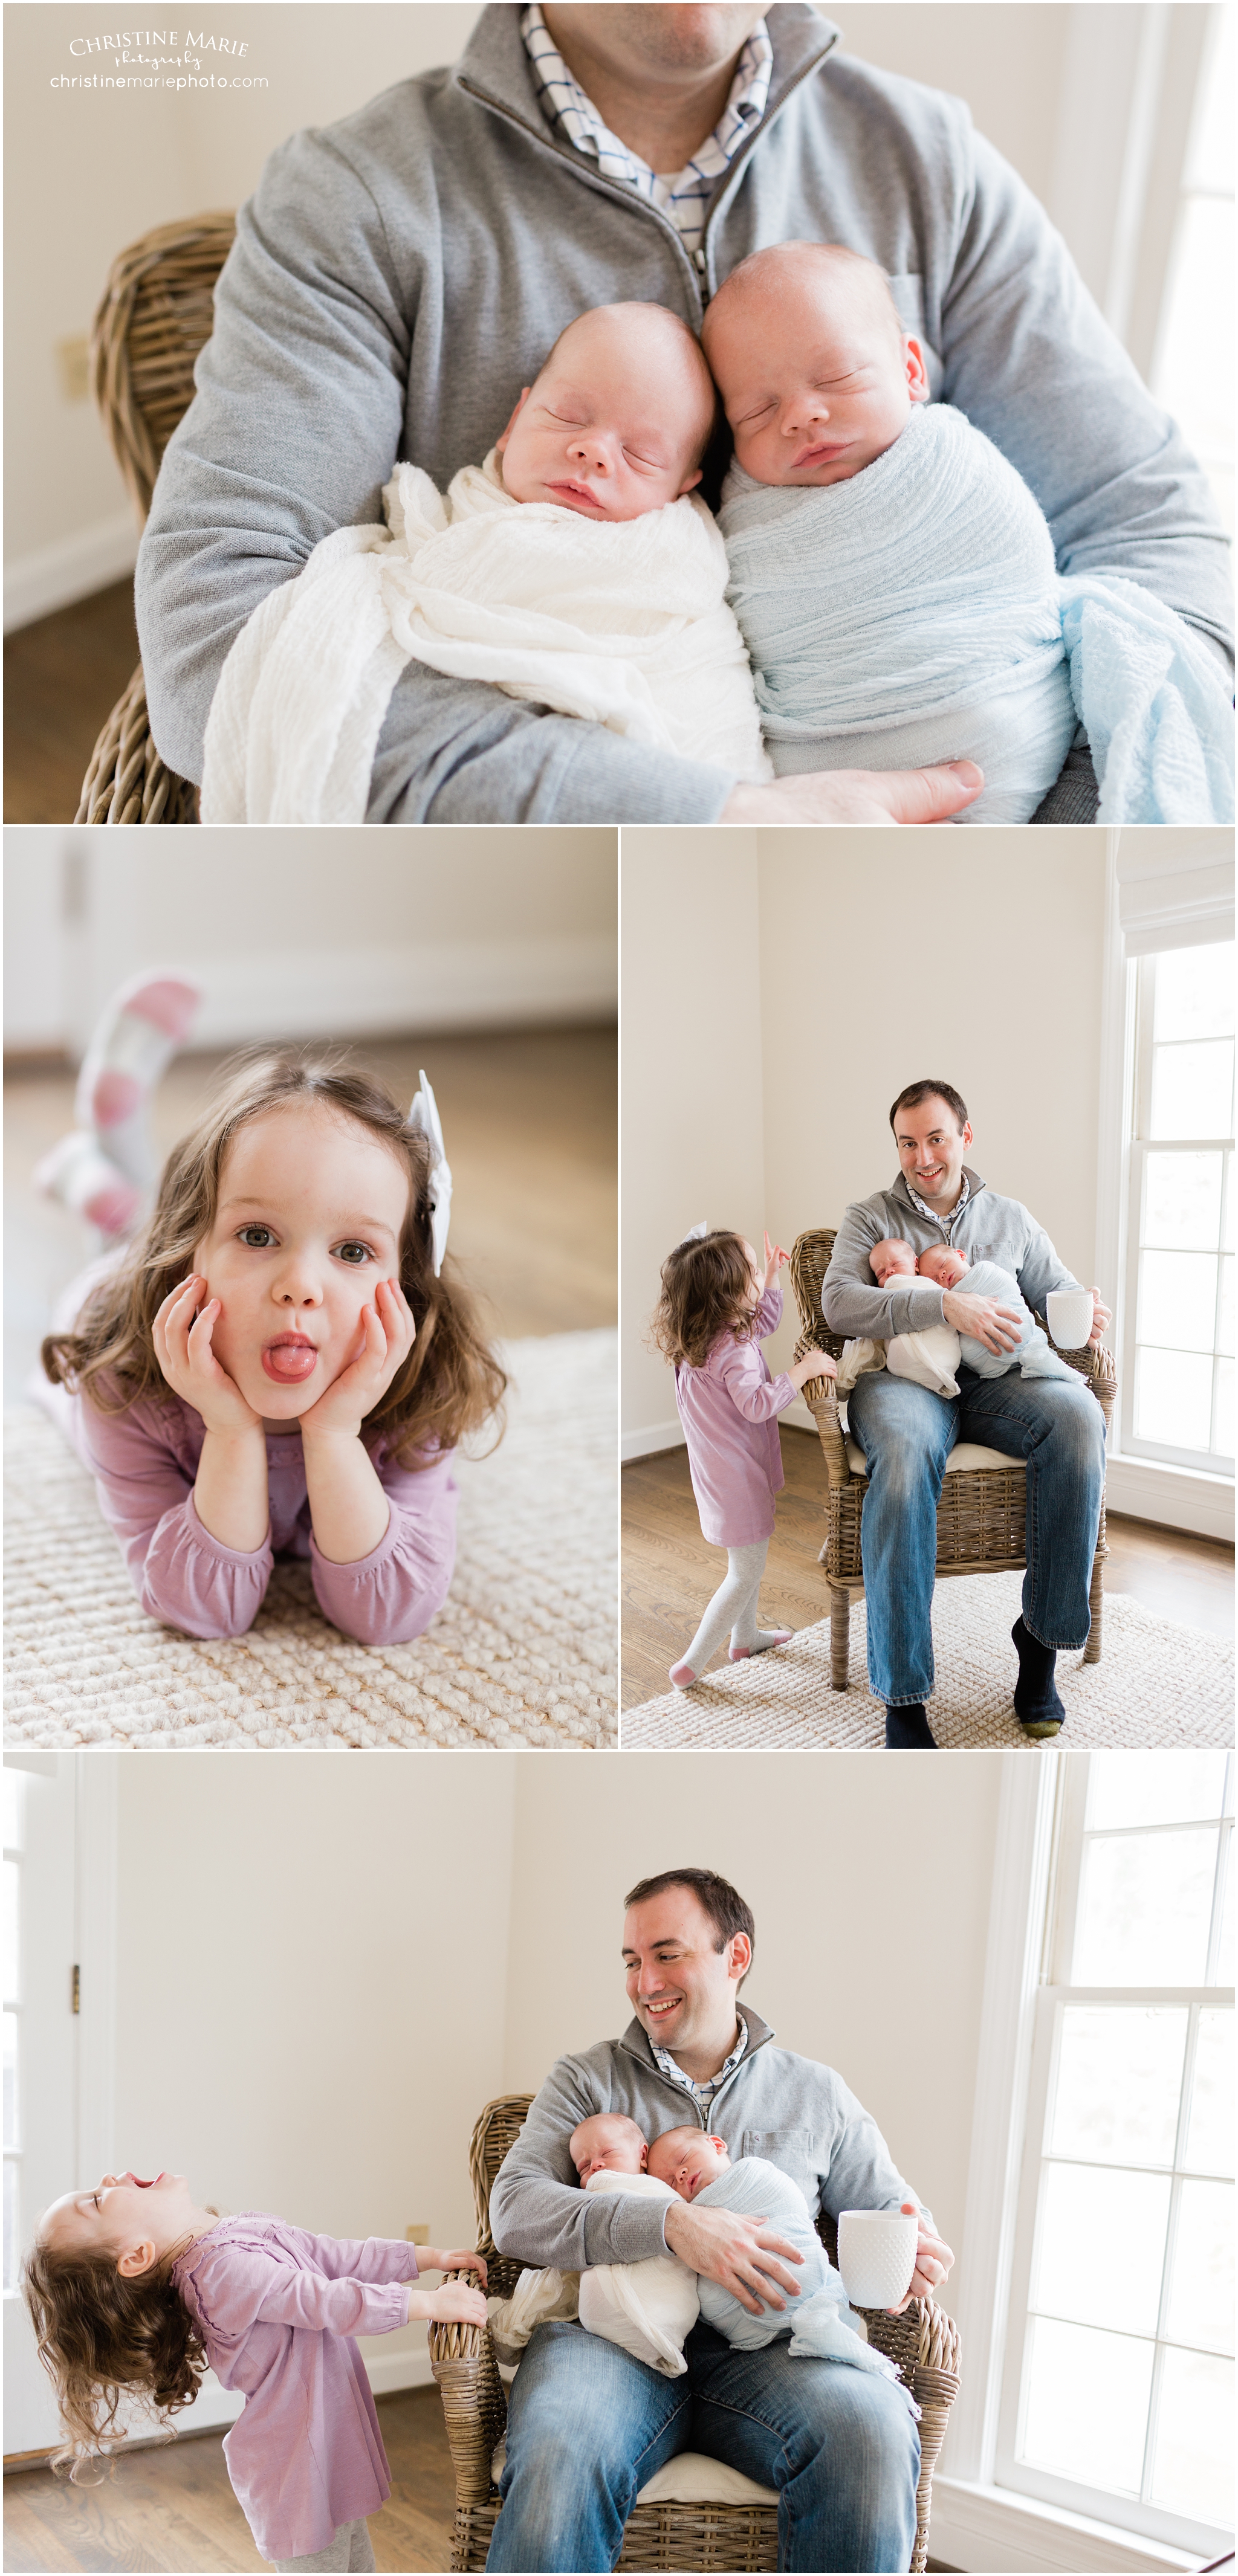 dad with twin babies and a toddler, christine marie photography